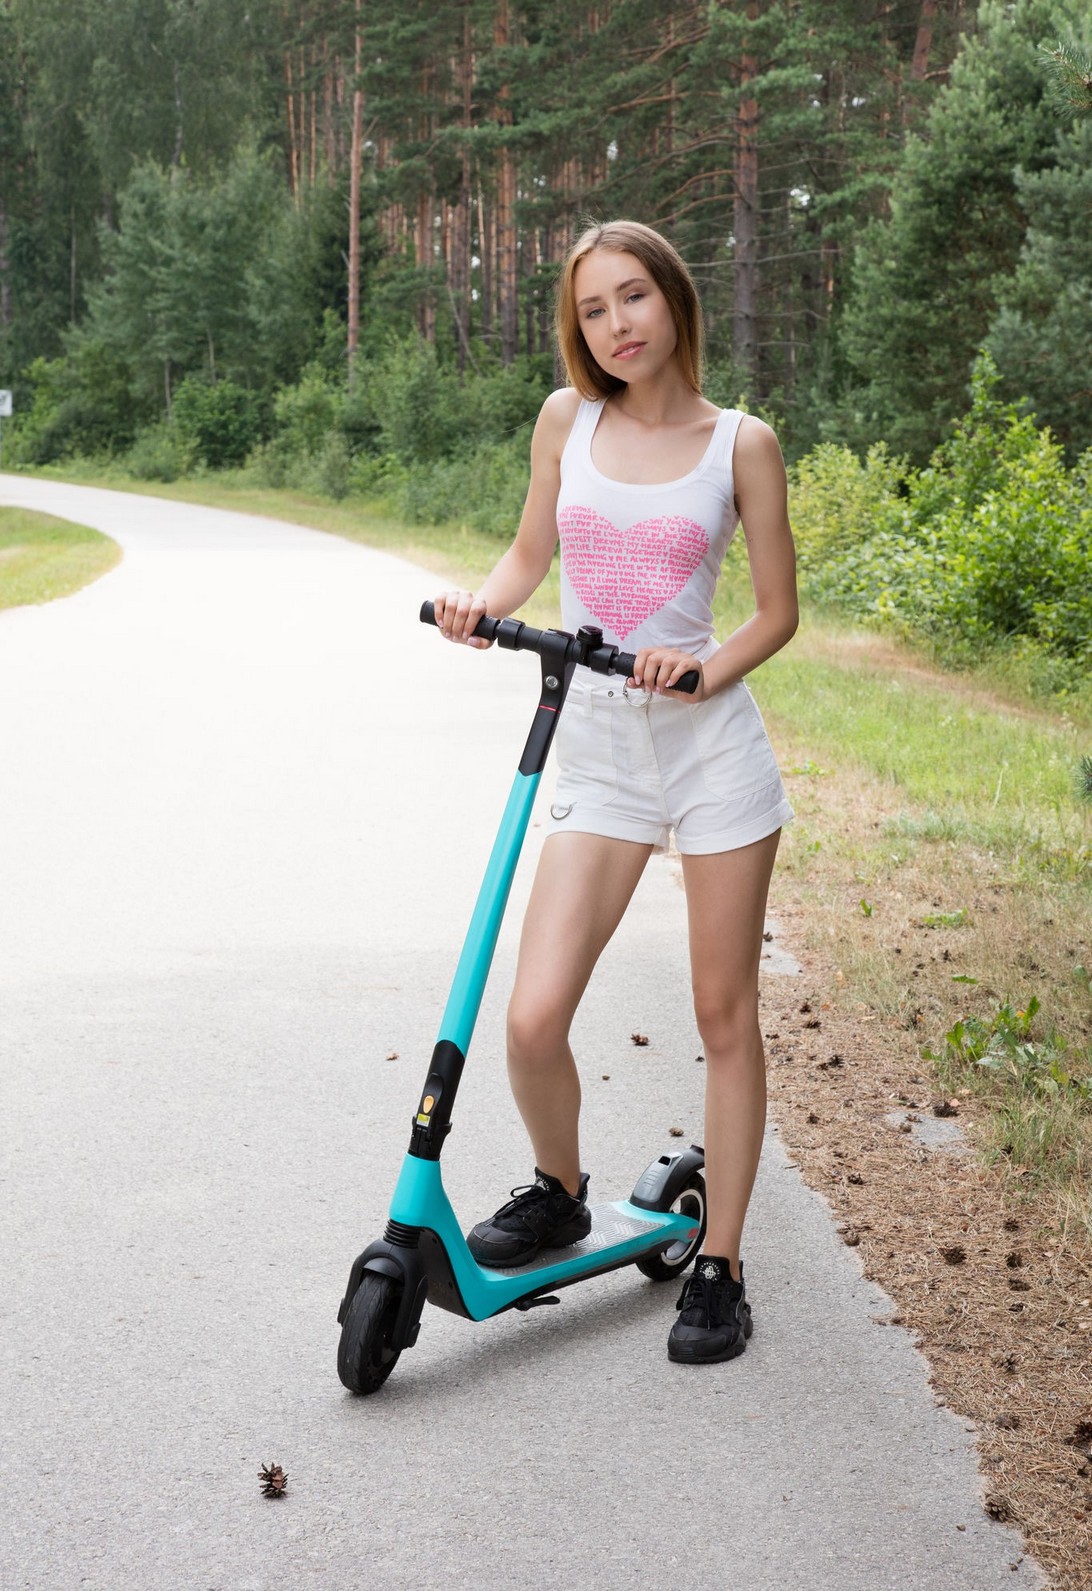 Girl On Scooter